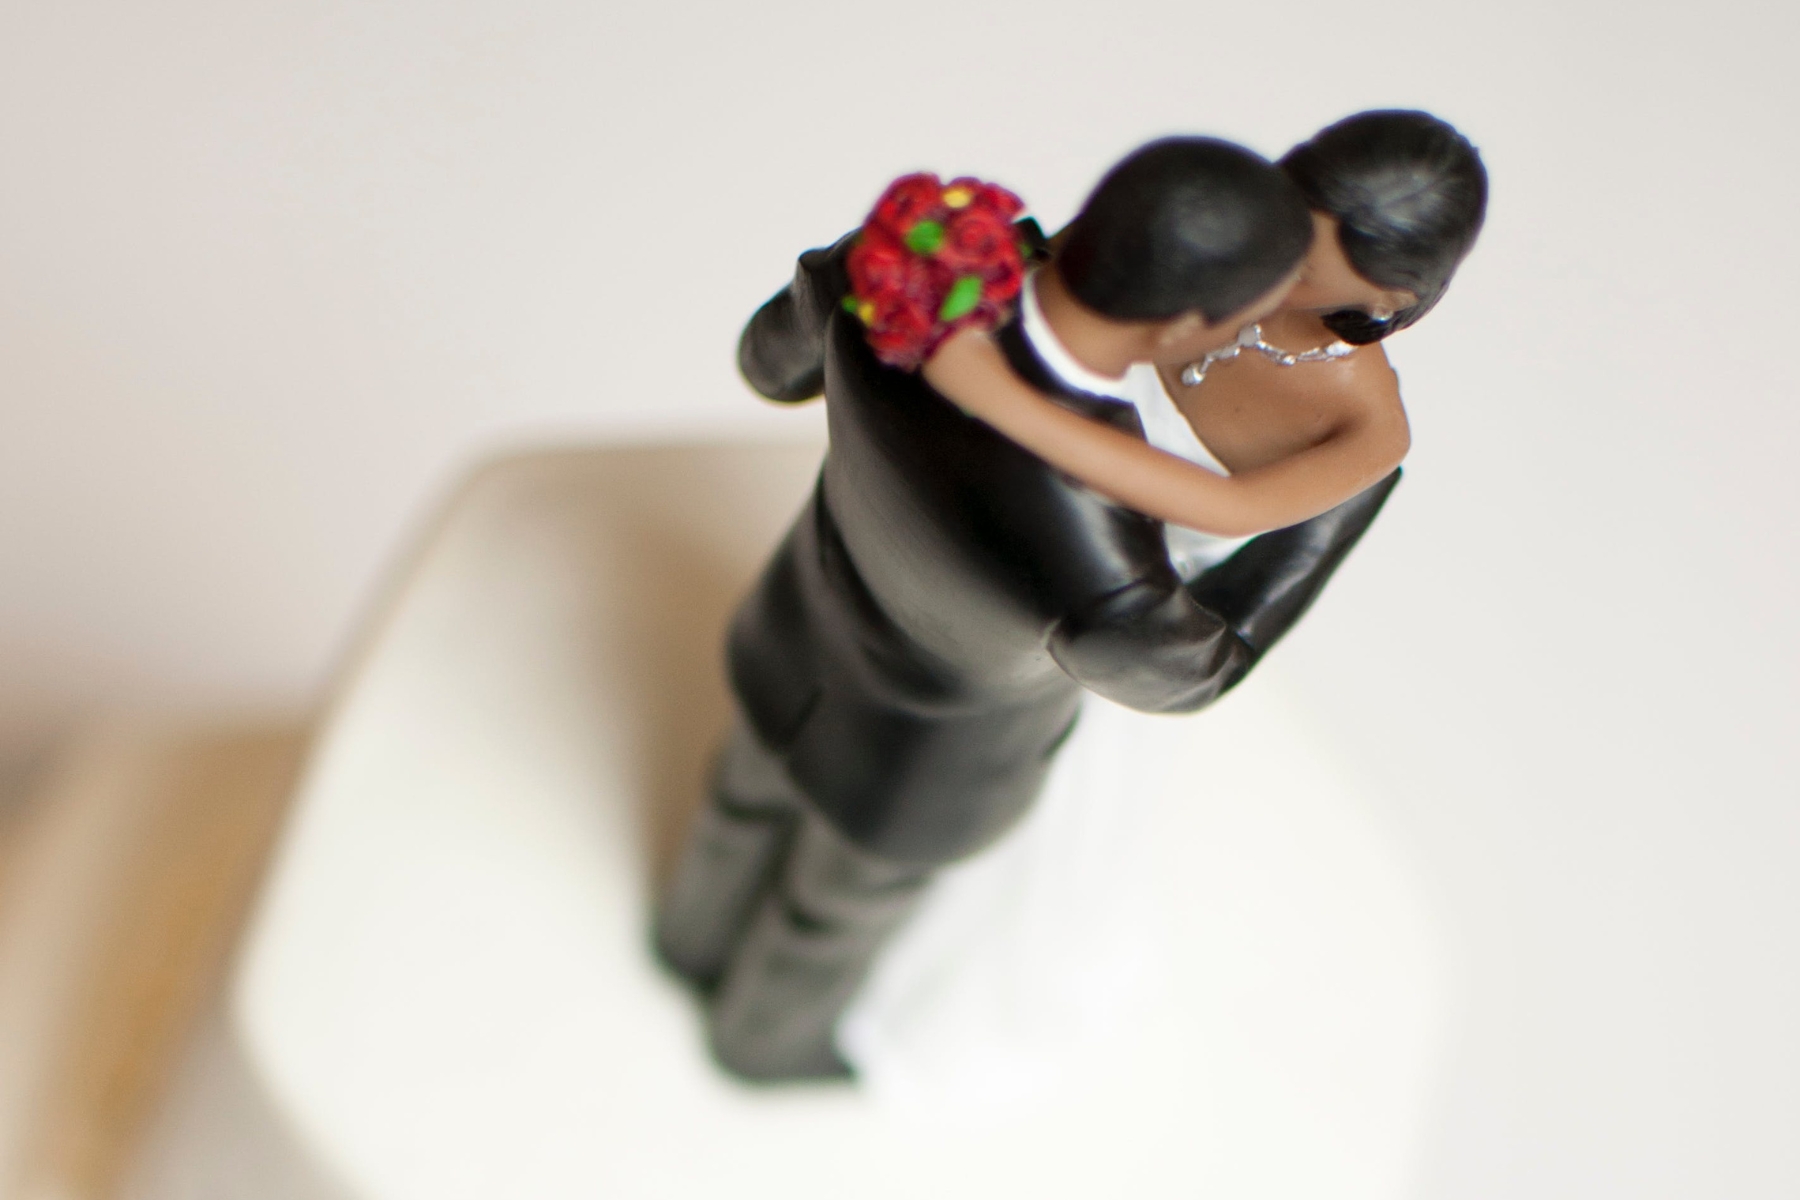 A Black groom and bride figurine are on top of a white cake